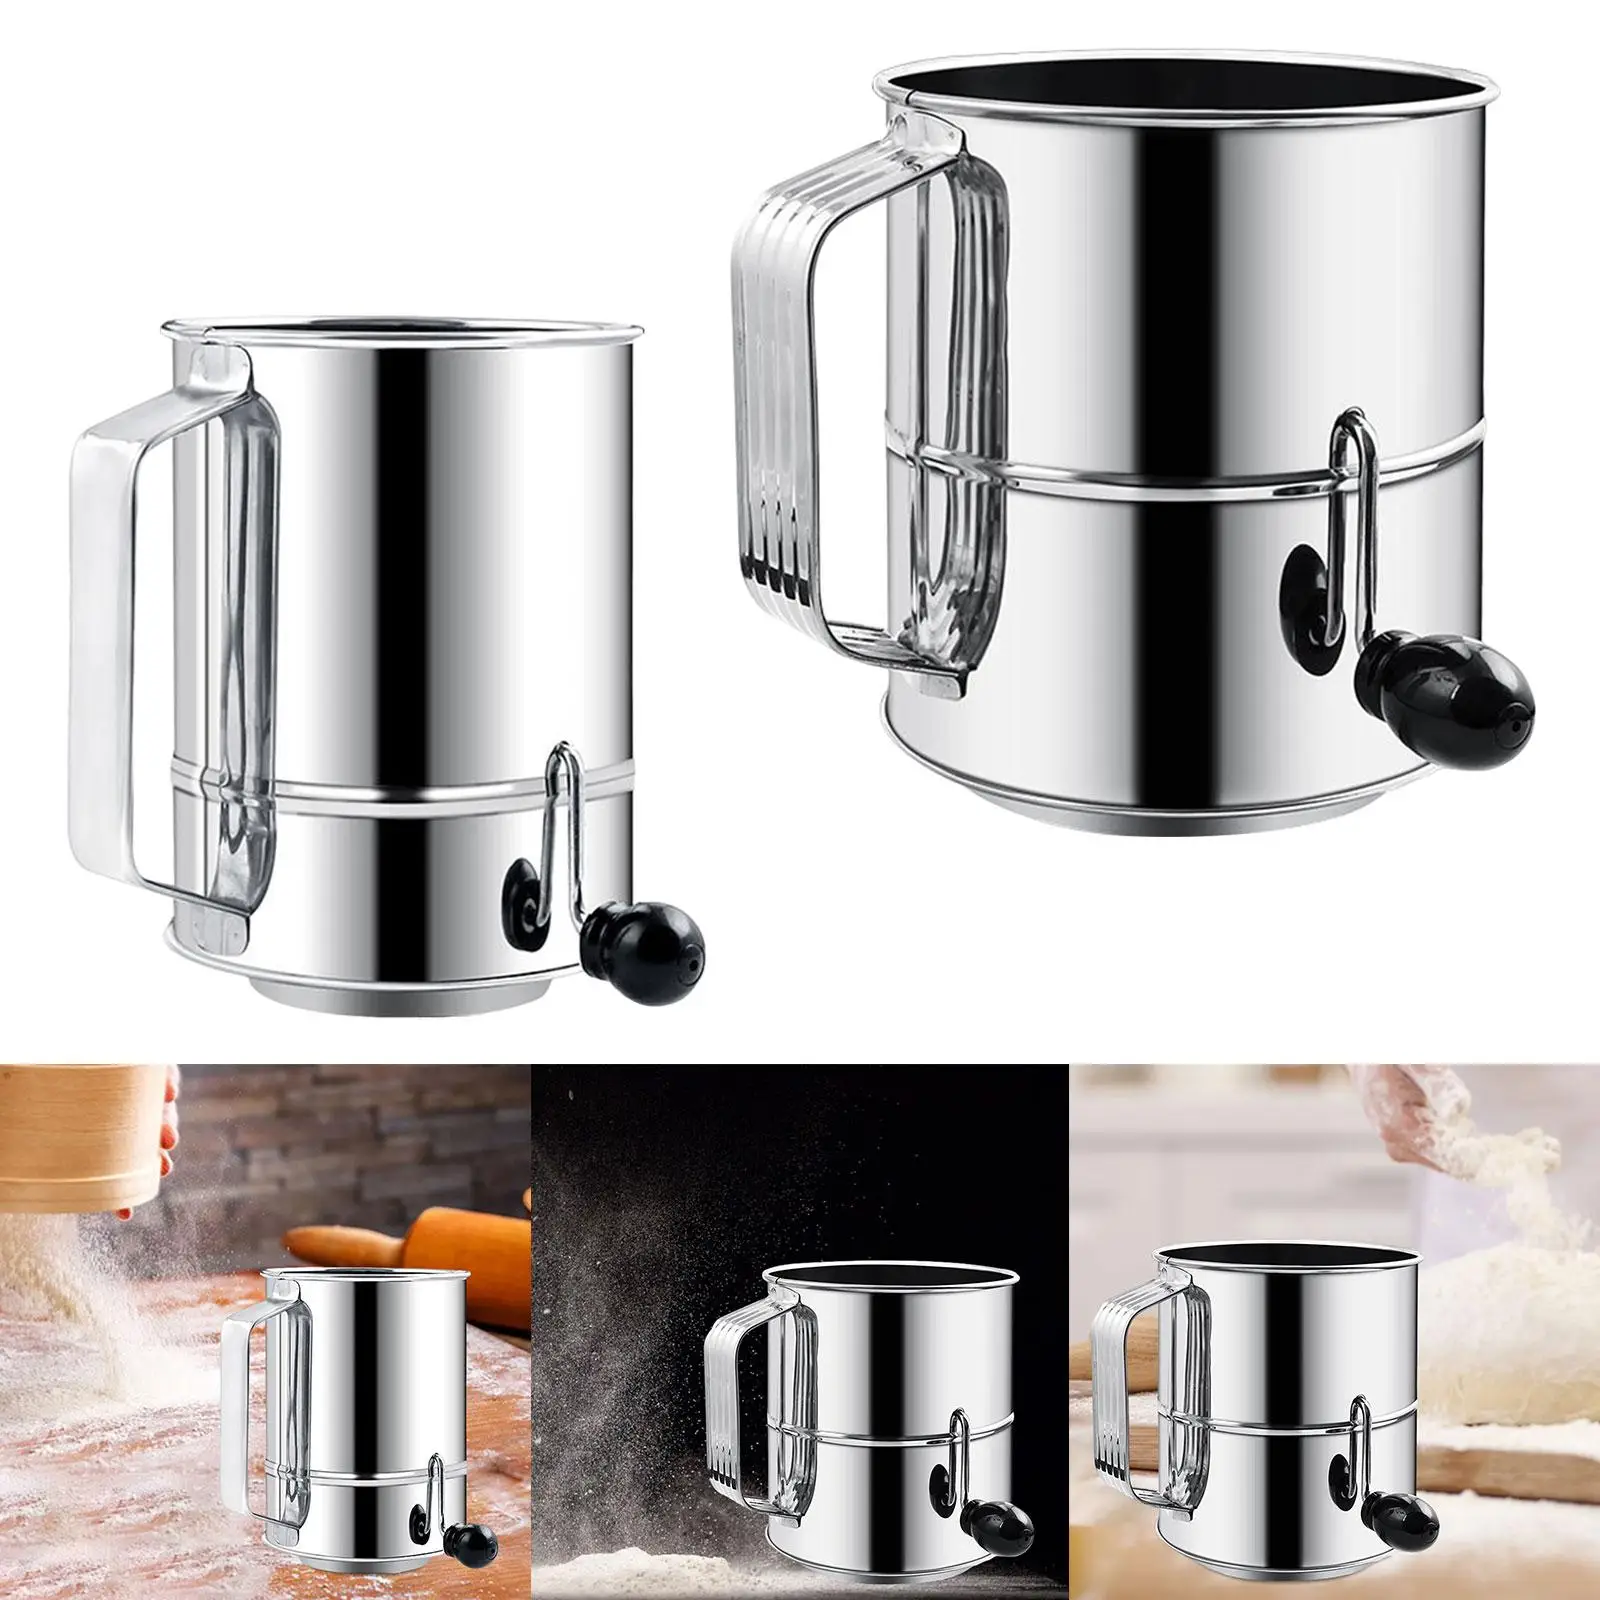 Flour Sifter.Stainless Steel Rotary Hand Crank, Baking Sugar Sifter with Fine